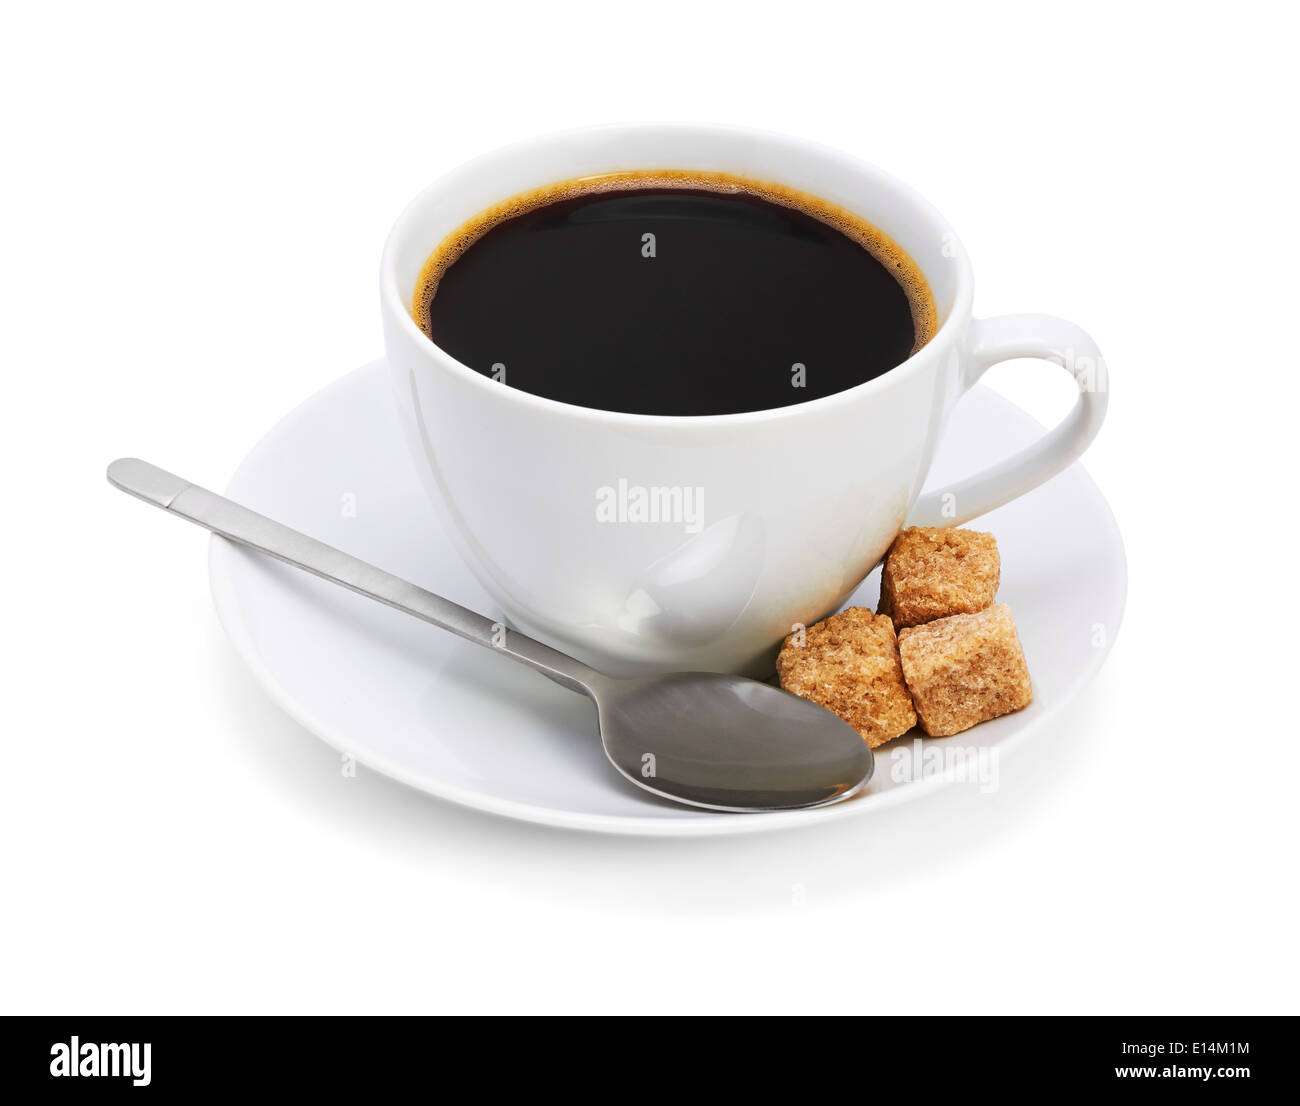 Cup of coffee, on white background, isolated Stock Photo